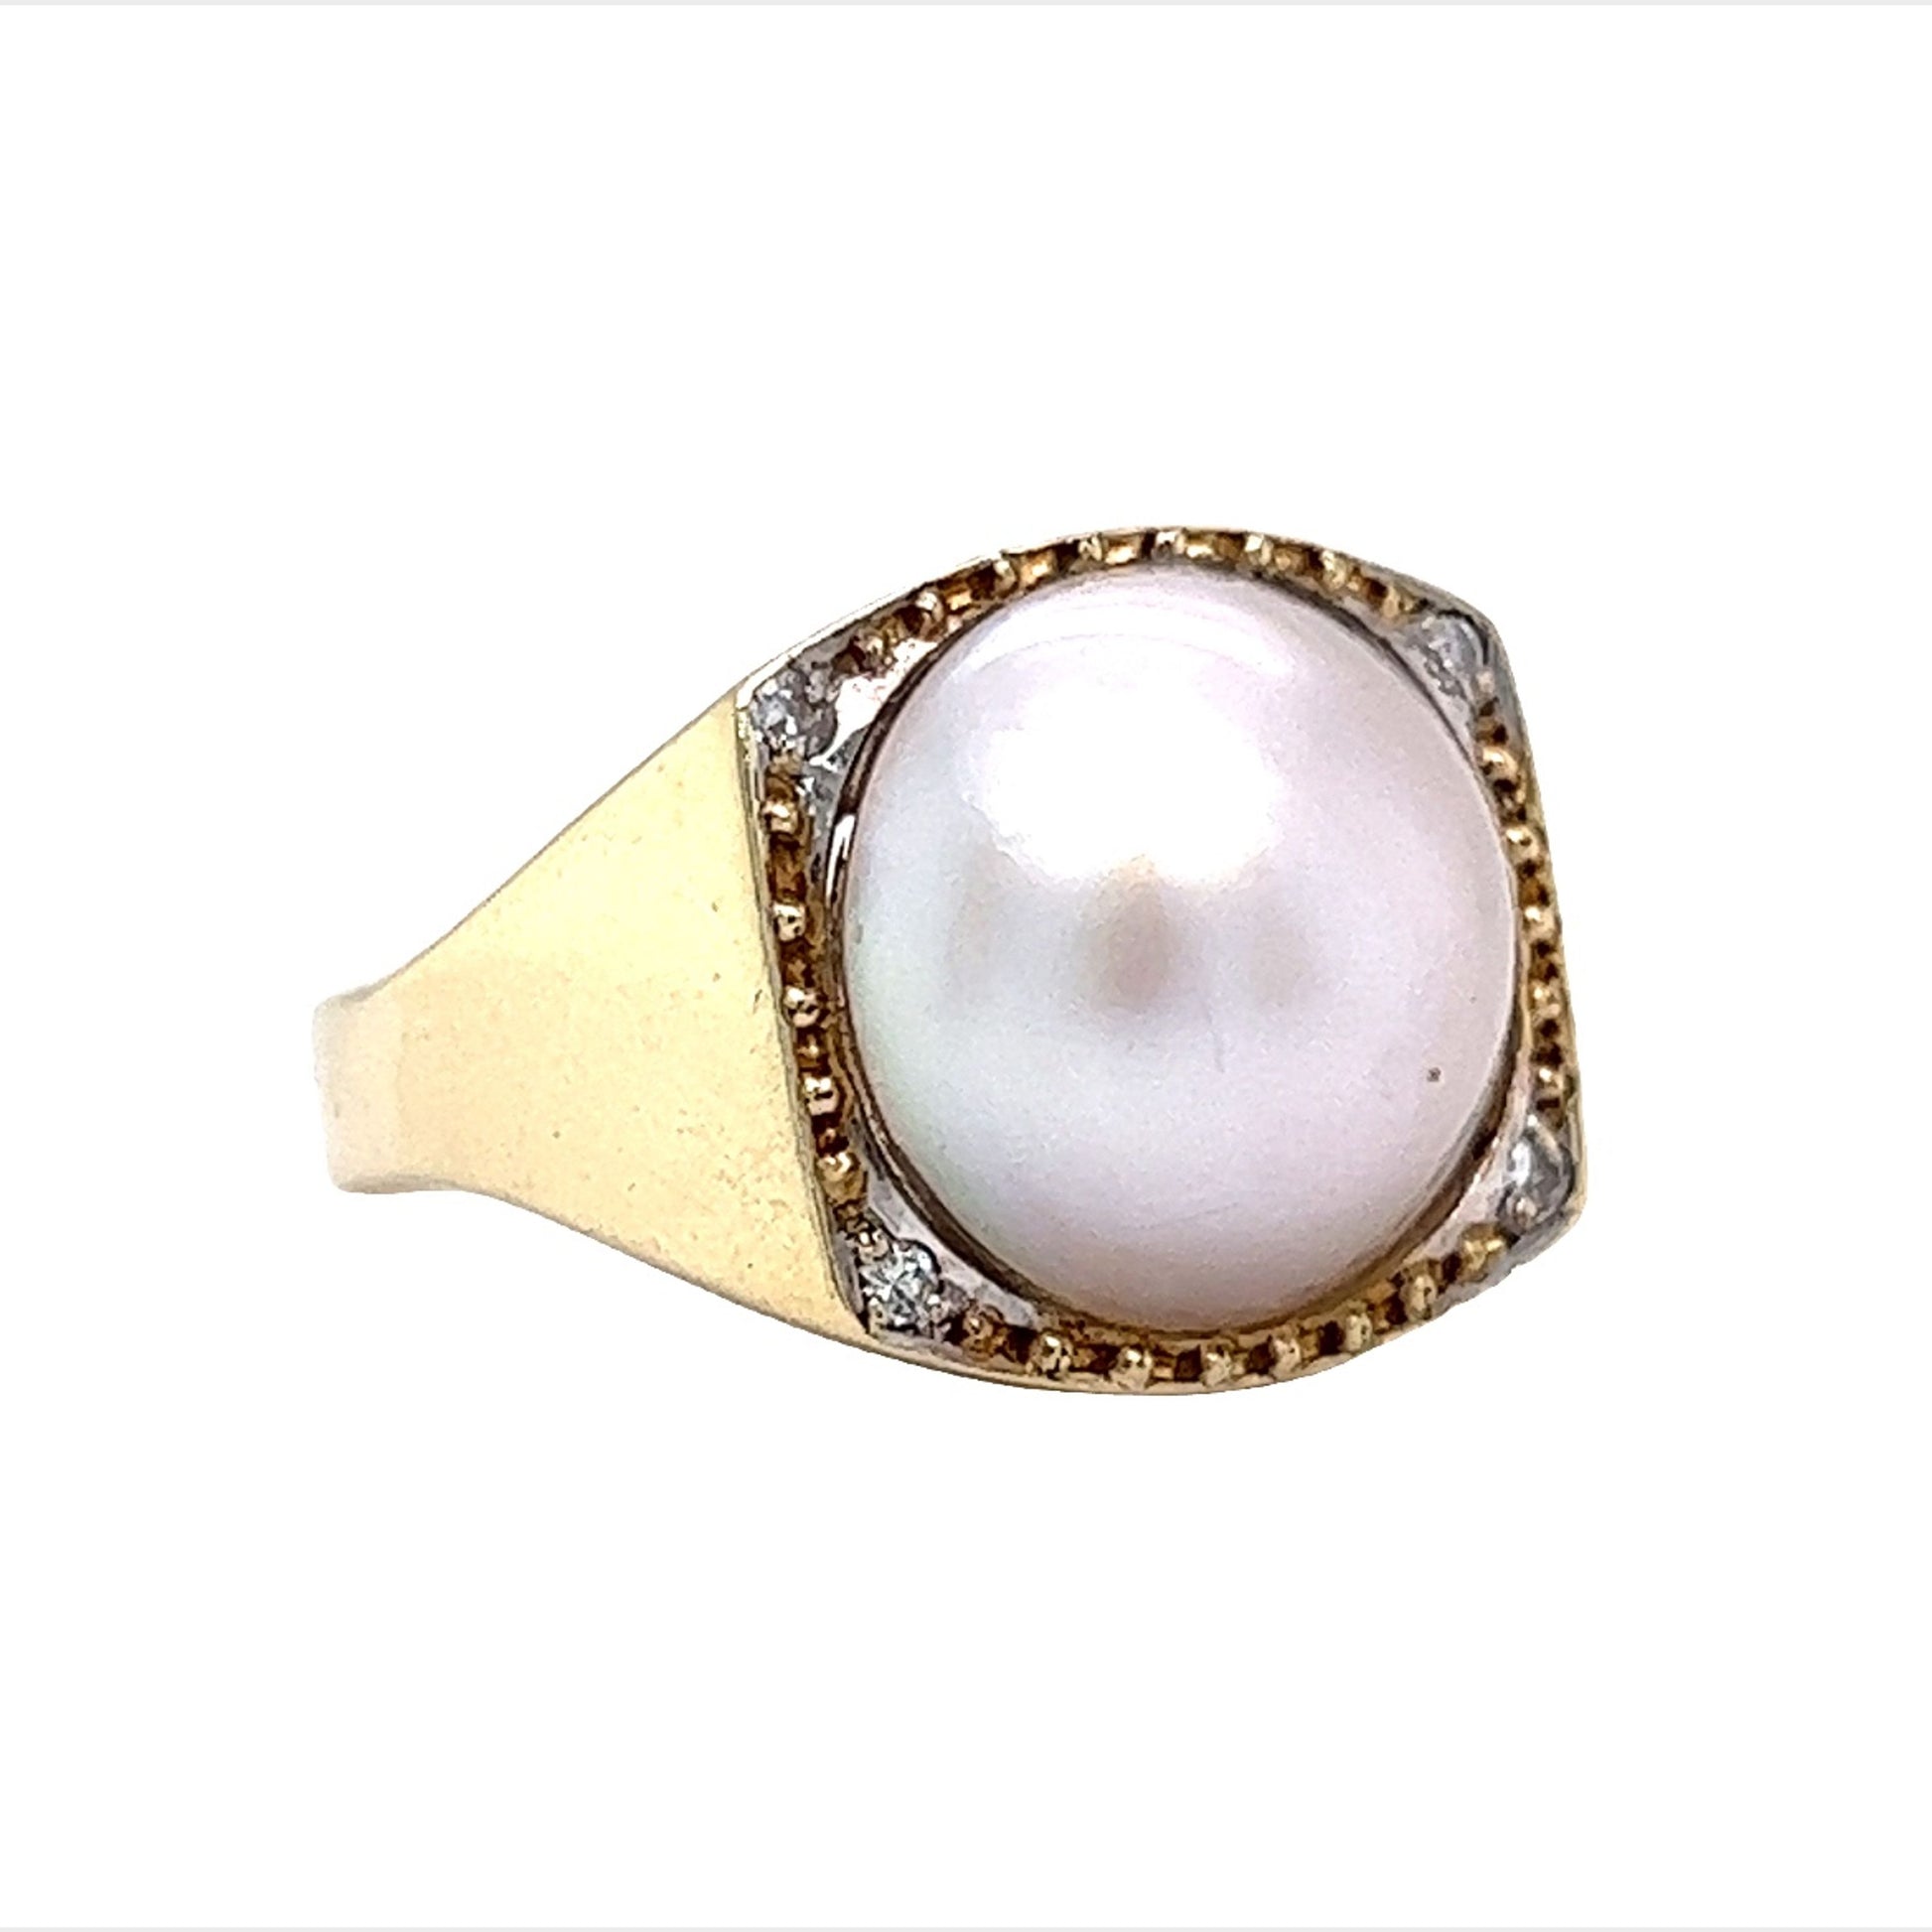 Pearl w/ Round Brilliant Diamond Cocktail Ring Yellow Gold